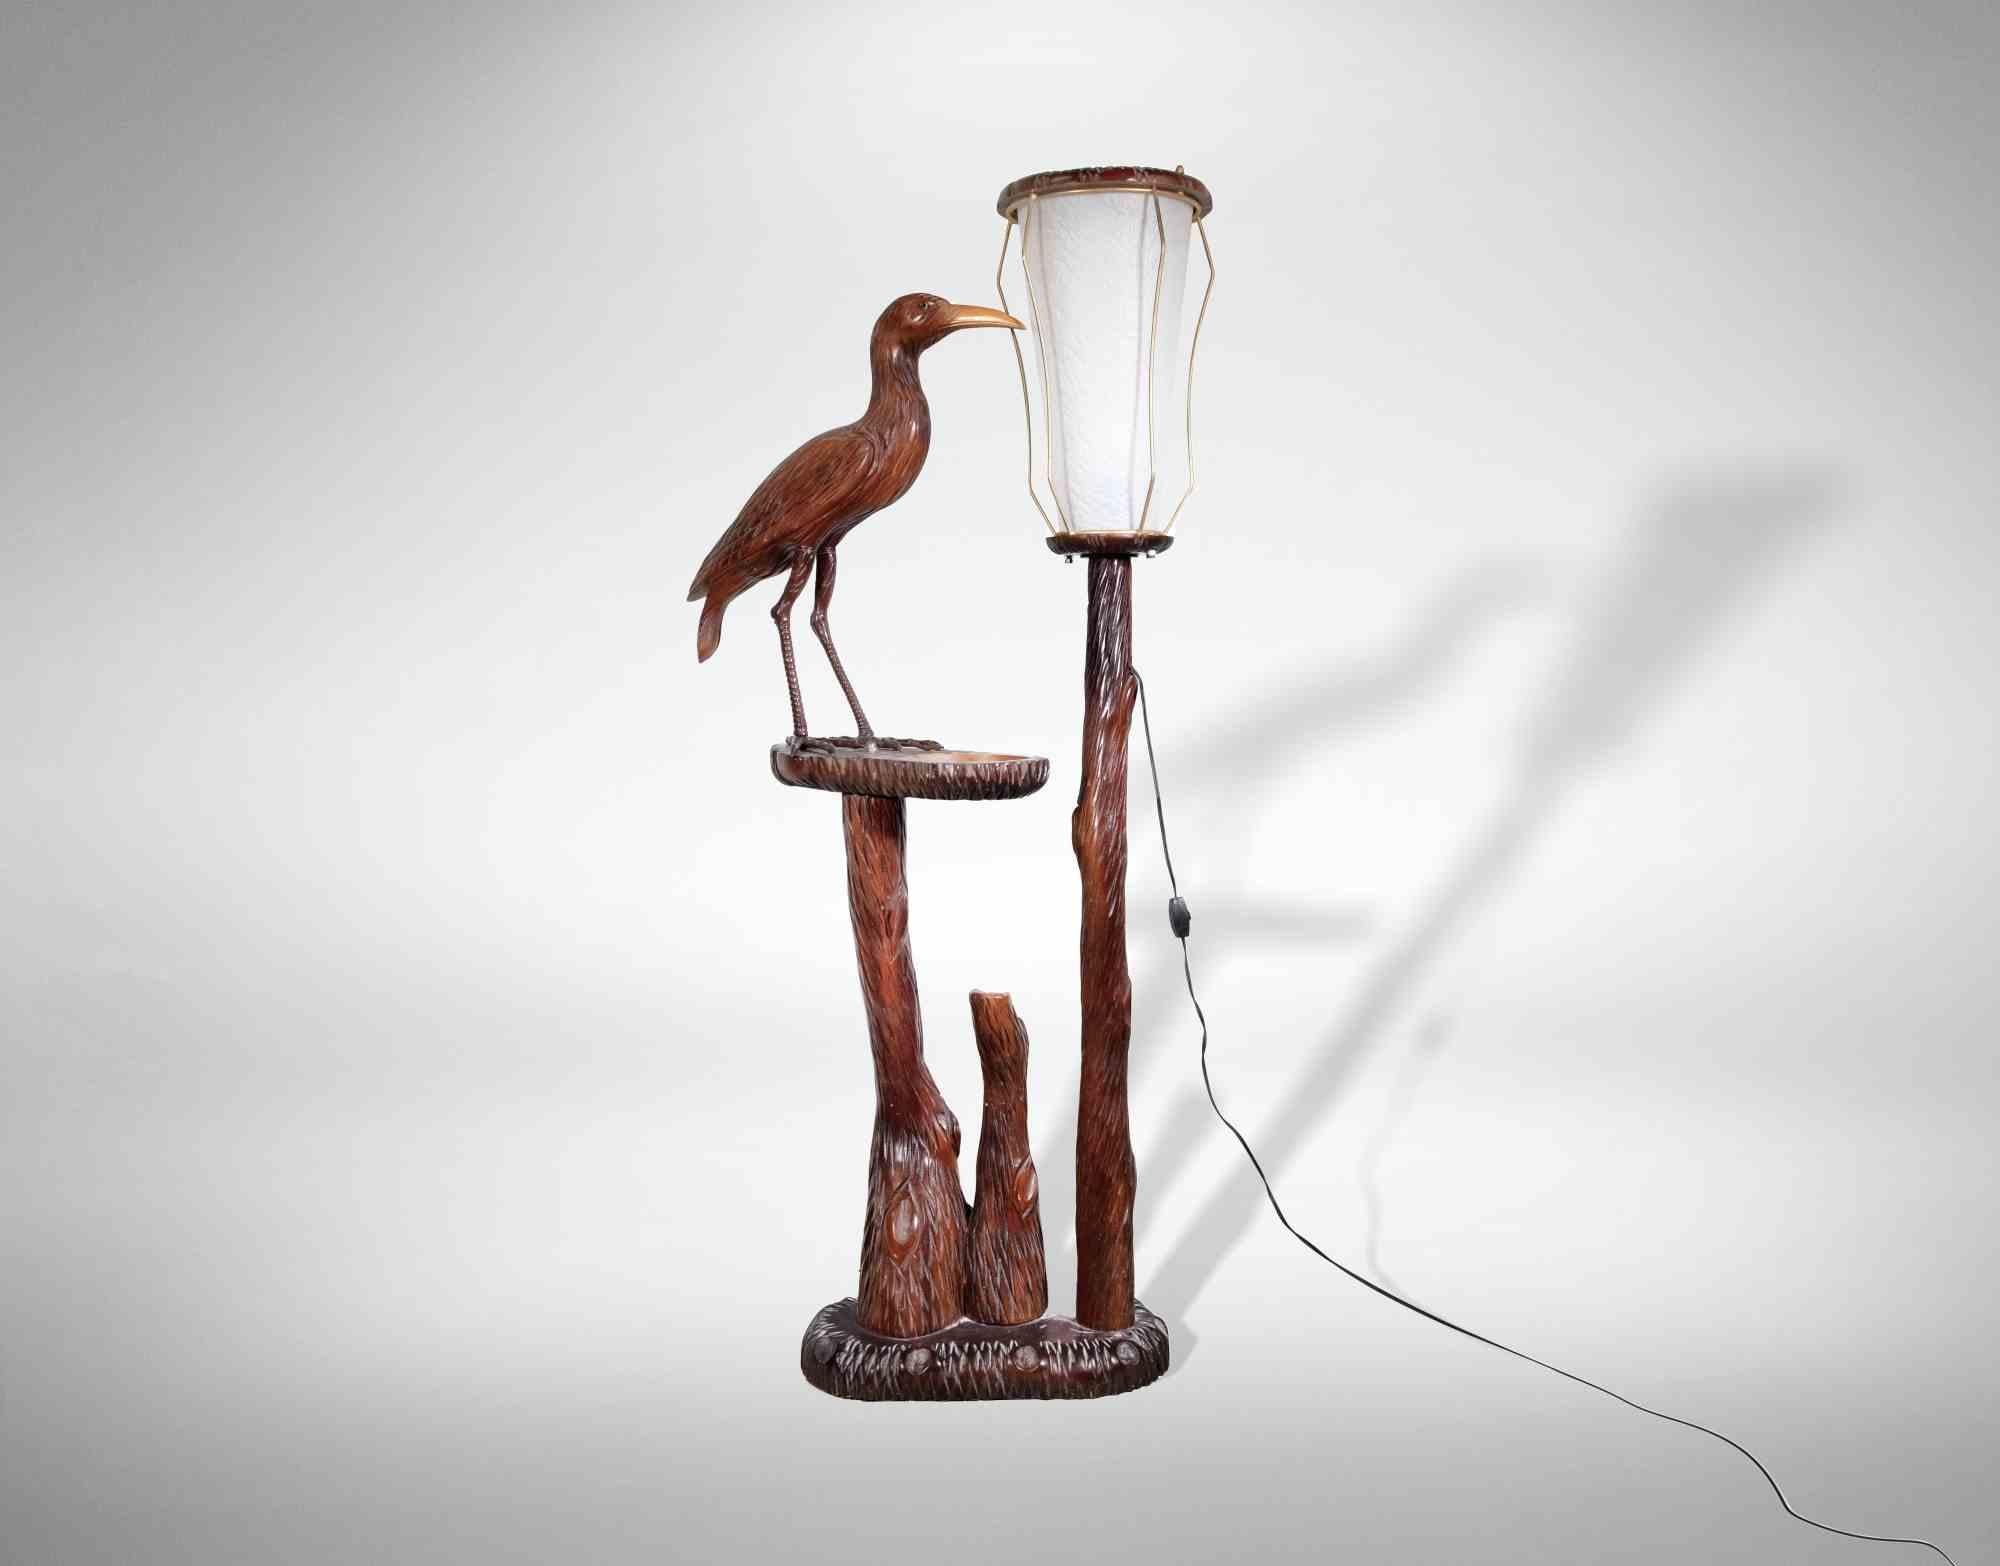 Vintage wooden lamp with bird is an original design lamp realized by Aldo Tura in the 1950s

A unique carved wooden floor lamp with parchment lampshade. The lamp has a wooden shelf with ashtray and a bird carved.

Aldo Tura (1909-1963), the